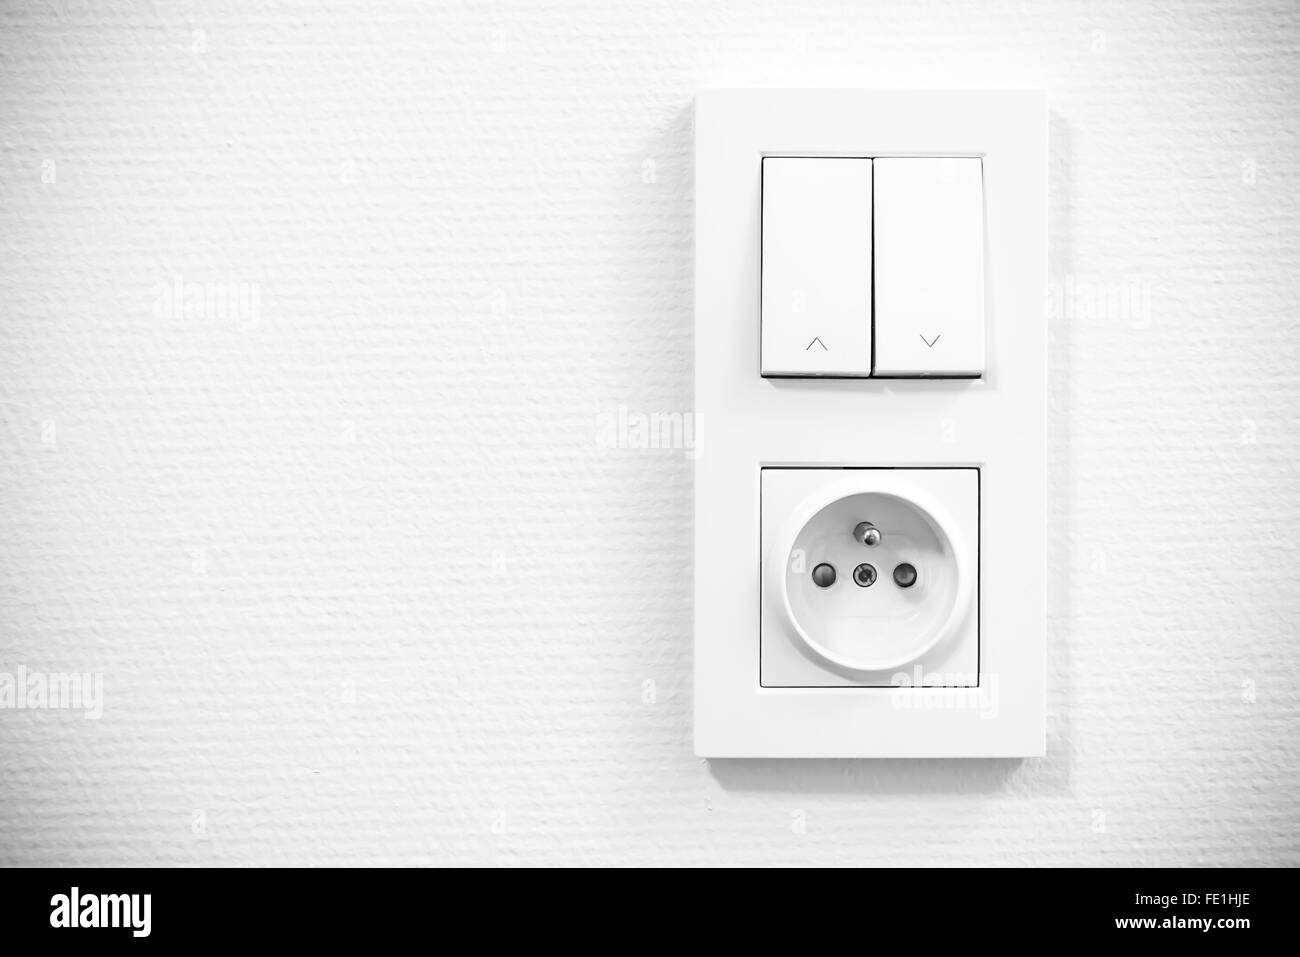 light switch and socket in frame on the wall Stock Photo